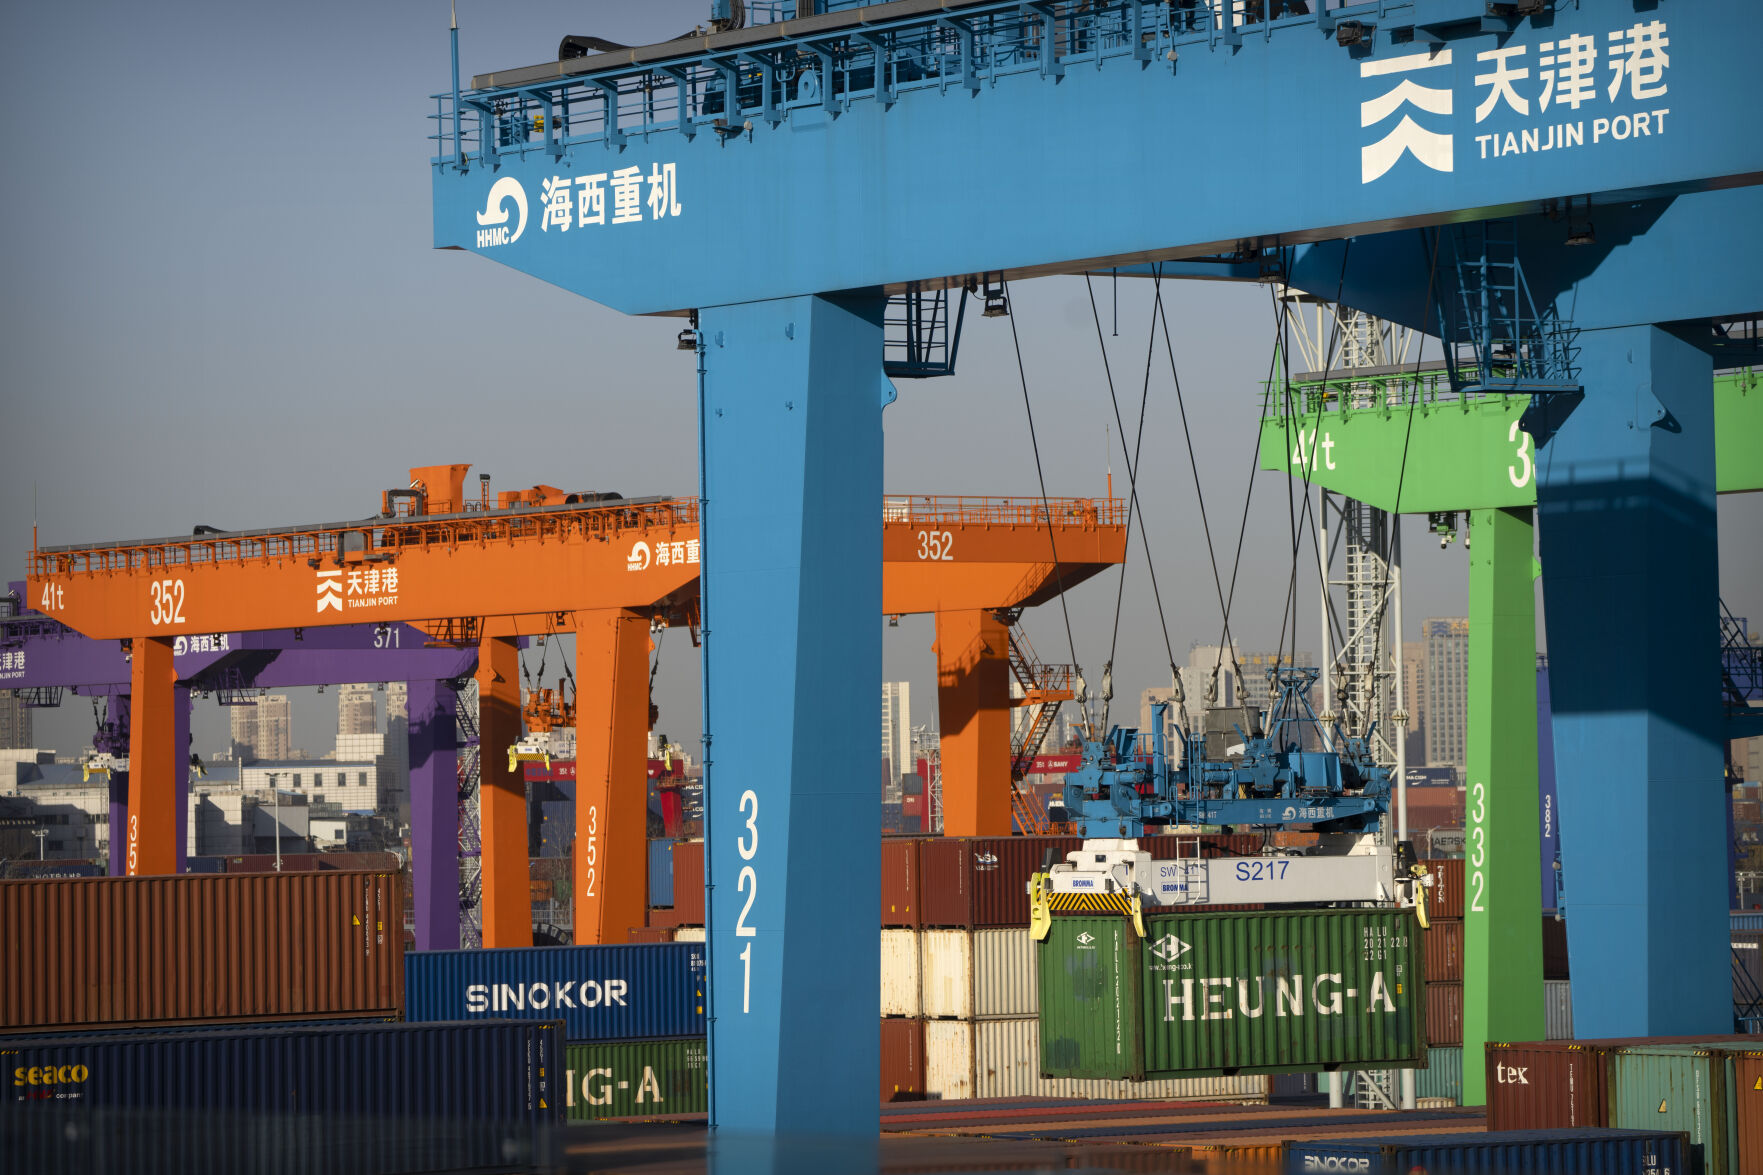 <p>File - A crane lifts a shipping container at an automated container port in Tianjin, China, Jan. 16, 2023. The global economy, which has proved surprisingly resilient this year, is expected to falter next year under the strain of wars, still-elevated inflation and continued high interest rates. (AP Photo/Mark Schiefelbein, File)</p>   PHOTO CREDIT: Mark Schiefelbein 